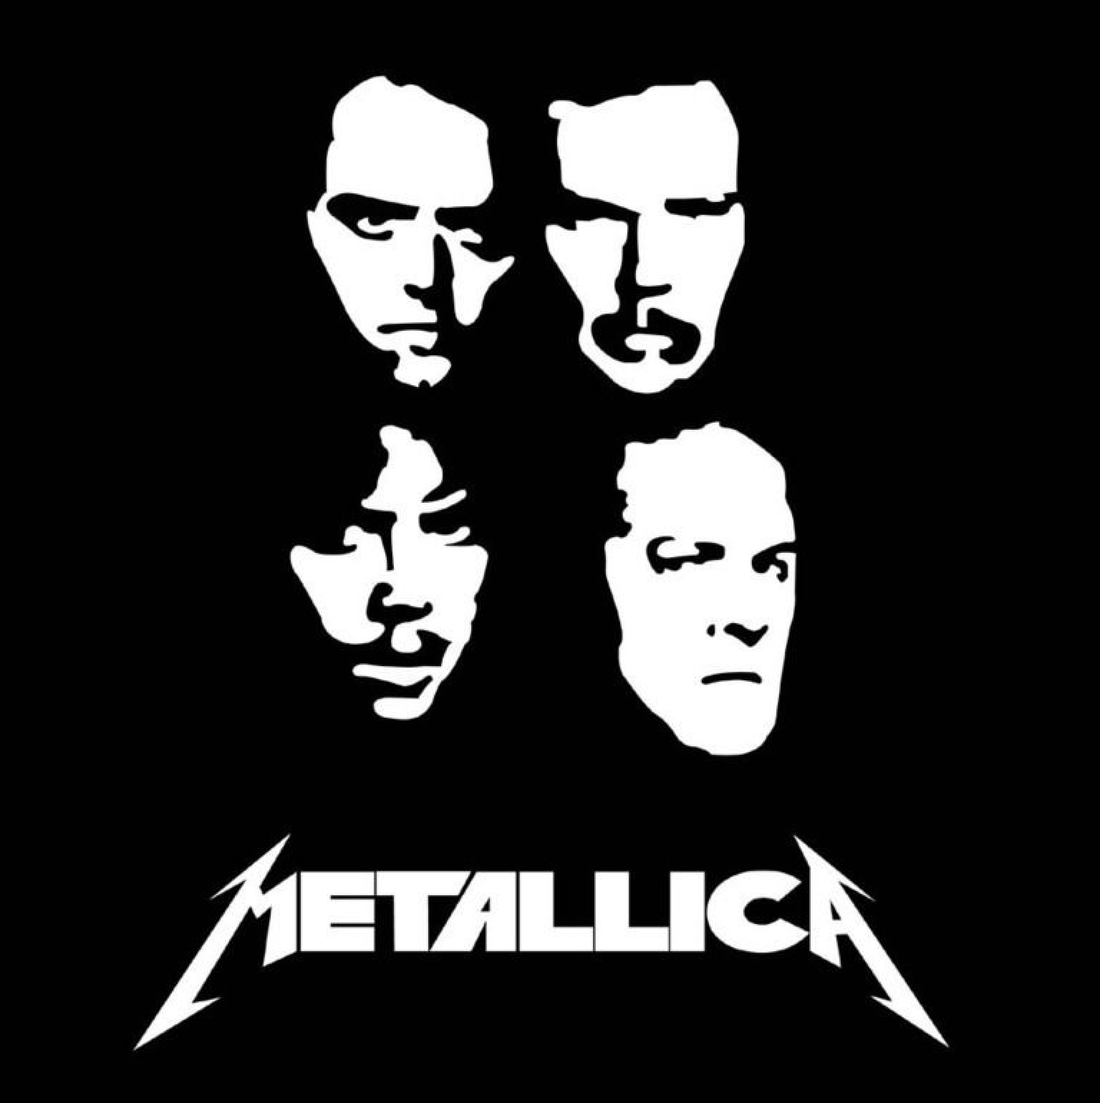 Metallica - The Blacklist has dropped Official Merchandise Store